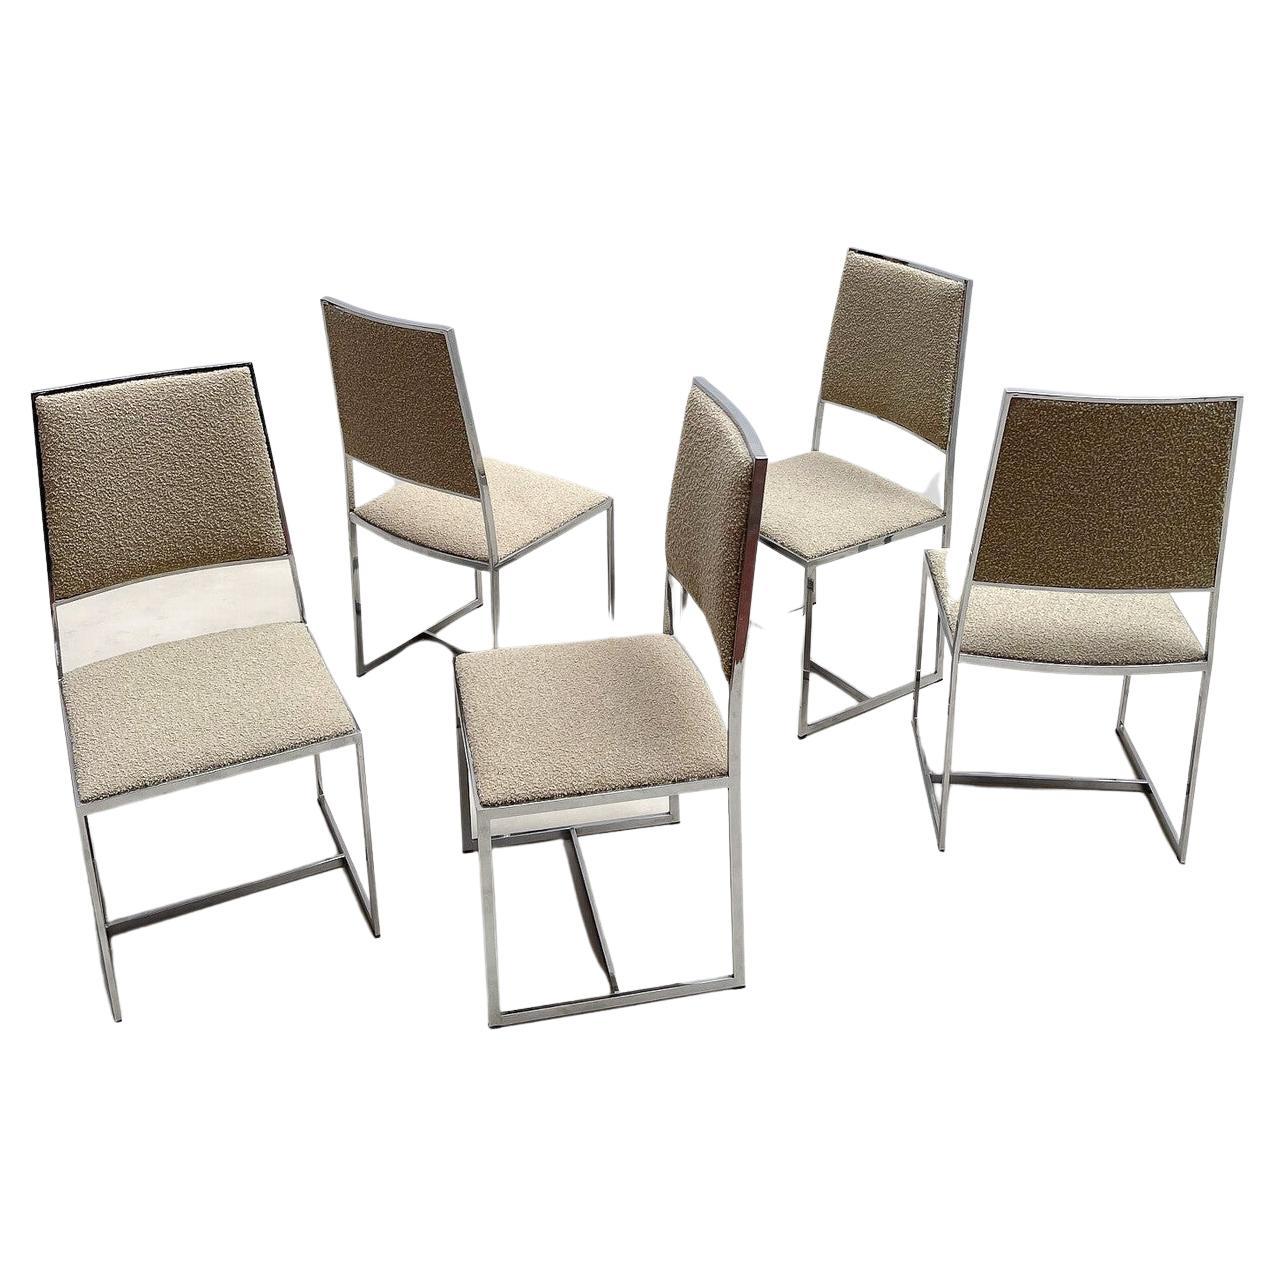 Mid-Century Modern Set of 5 Chairs Willy Rizzo Style, Chrome and Boucle Fabric For Sale